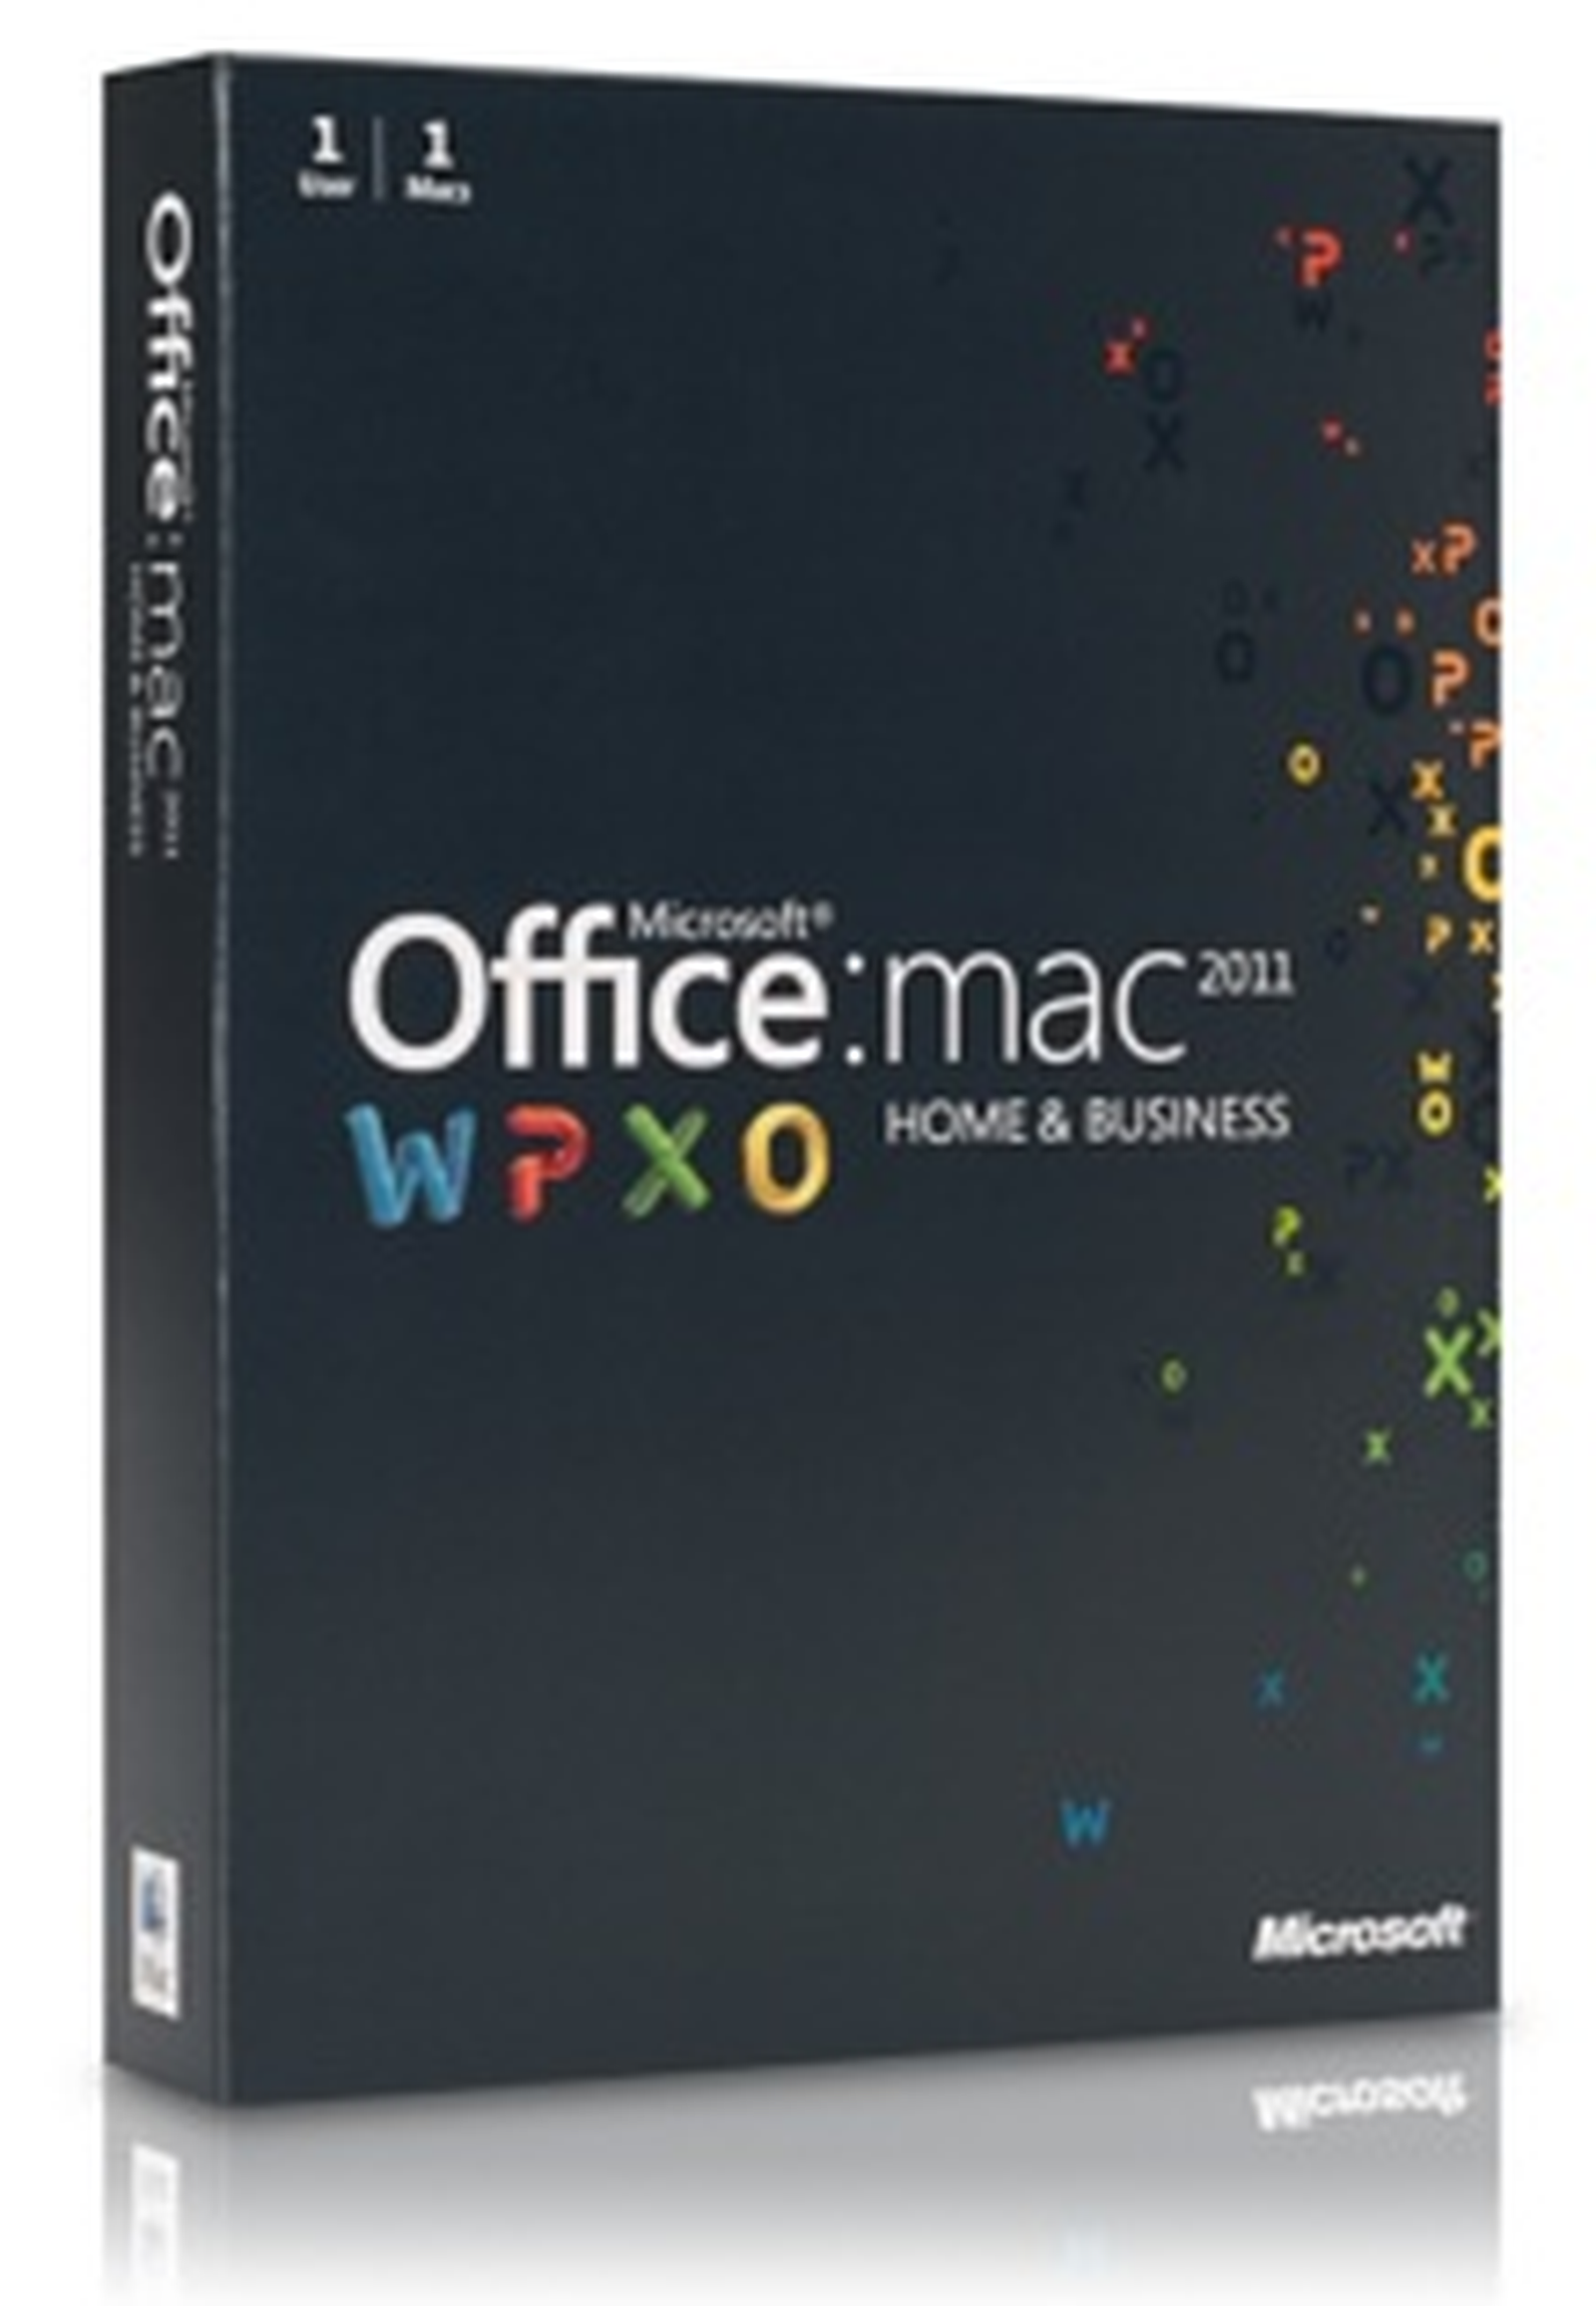 office 2008 for mac update problem